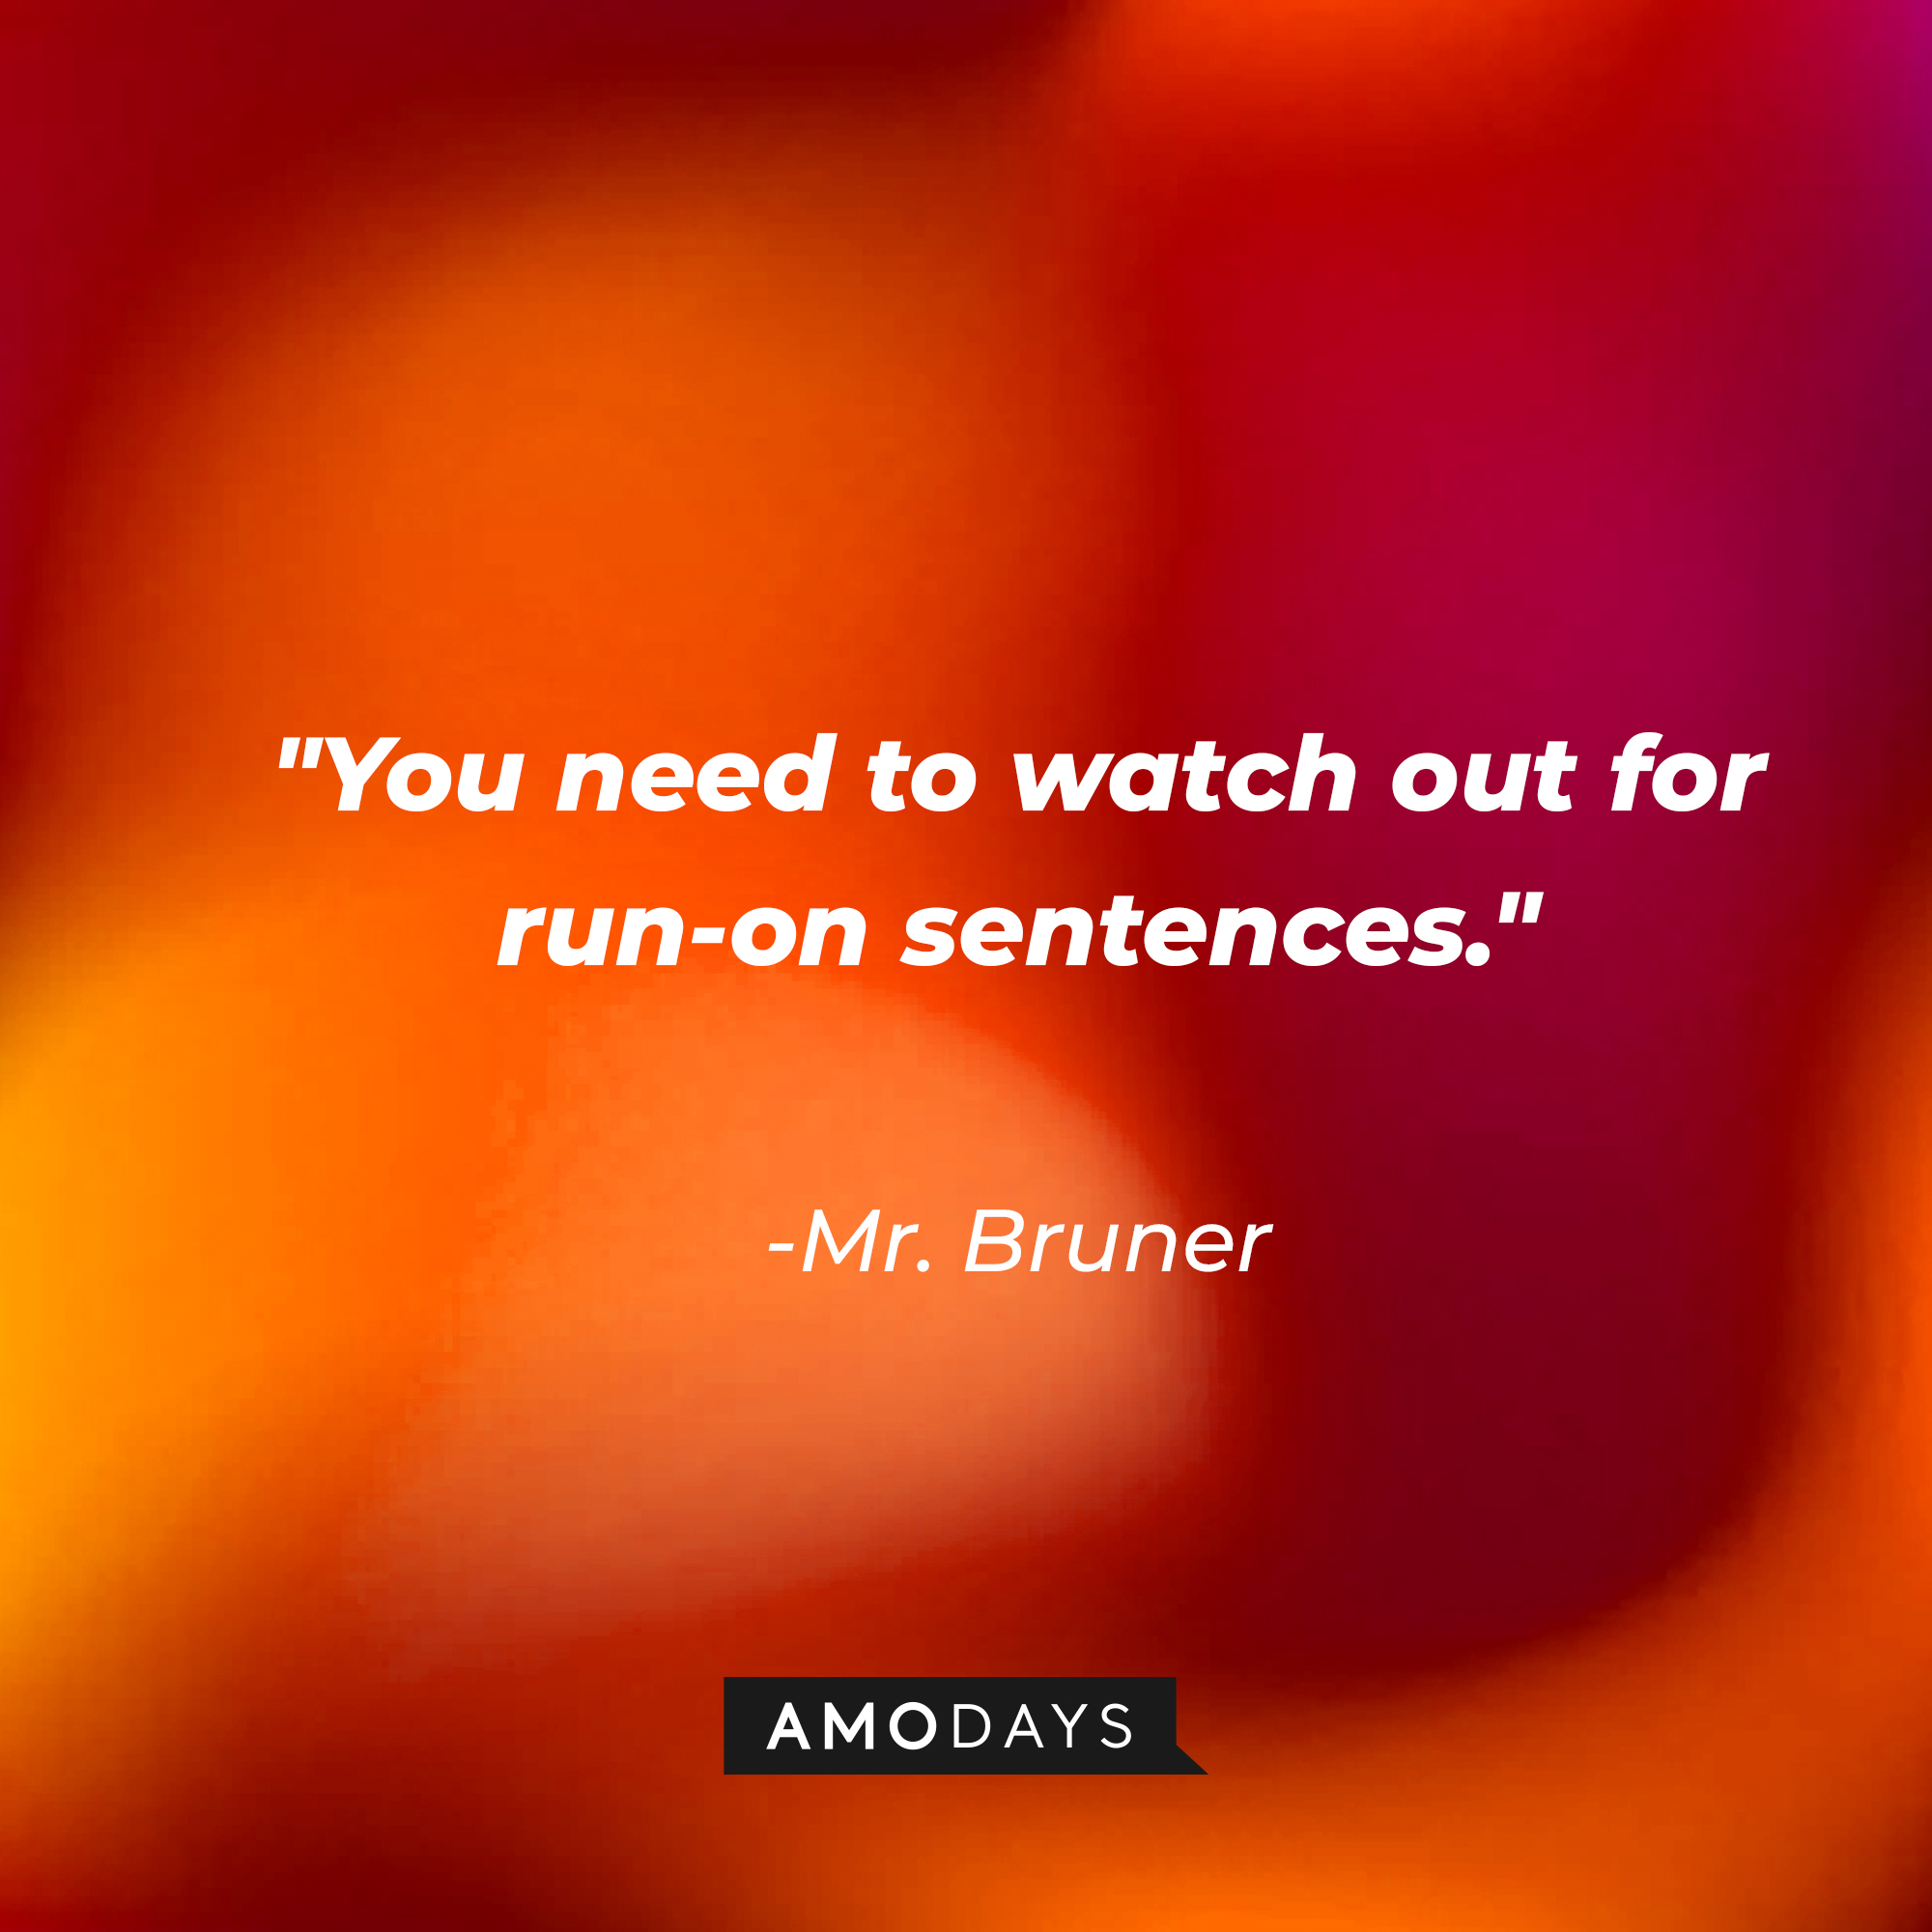 Mr. Bruner's quote: "You need to watch out for run-on sentences." | Source: AmoDays